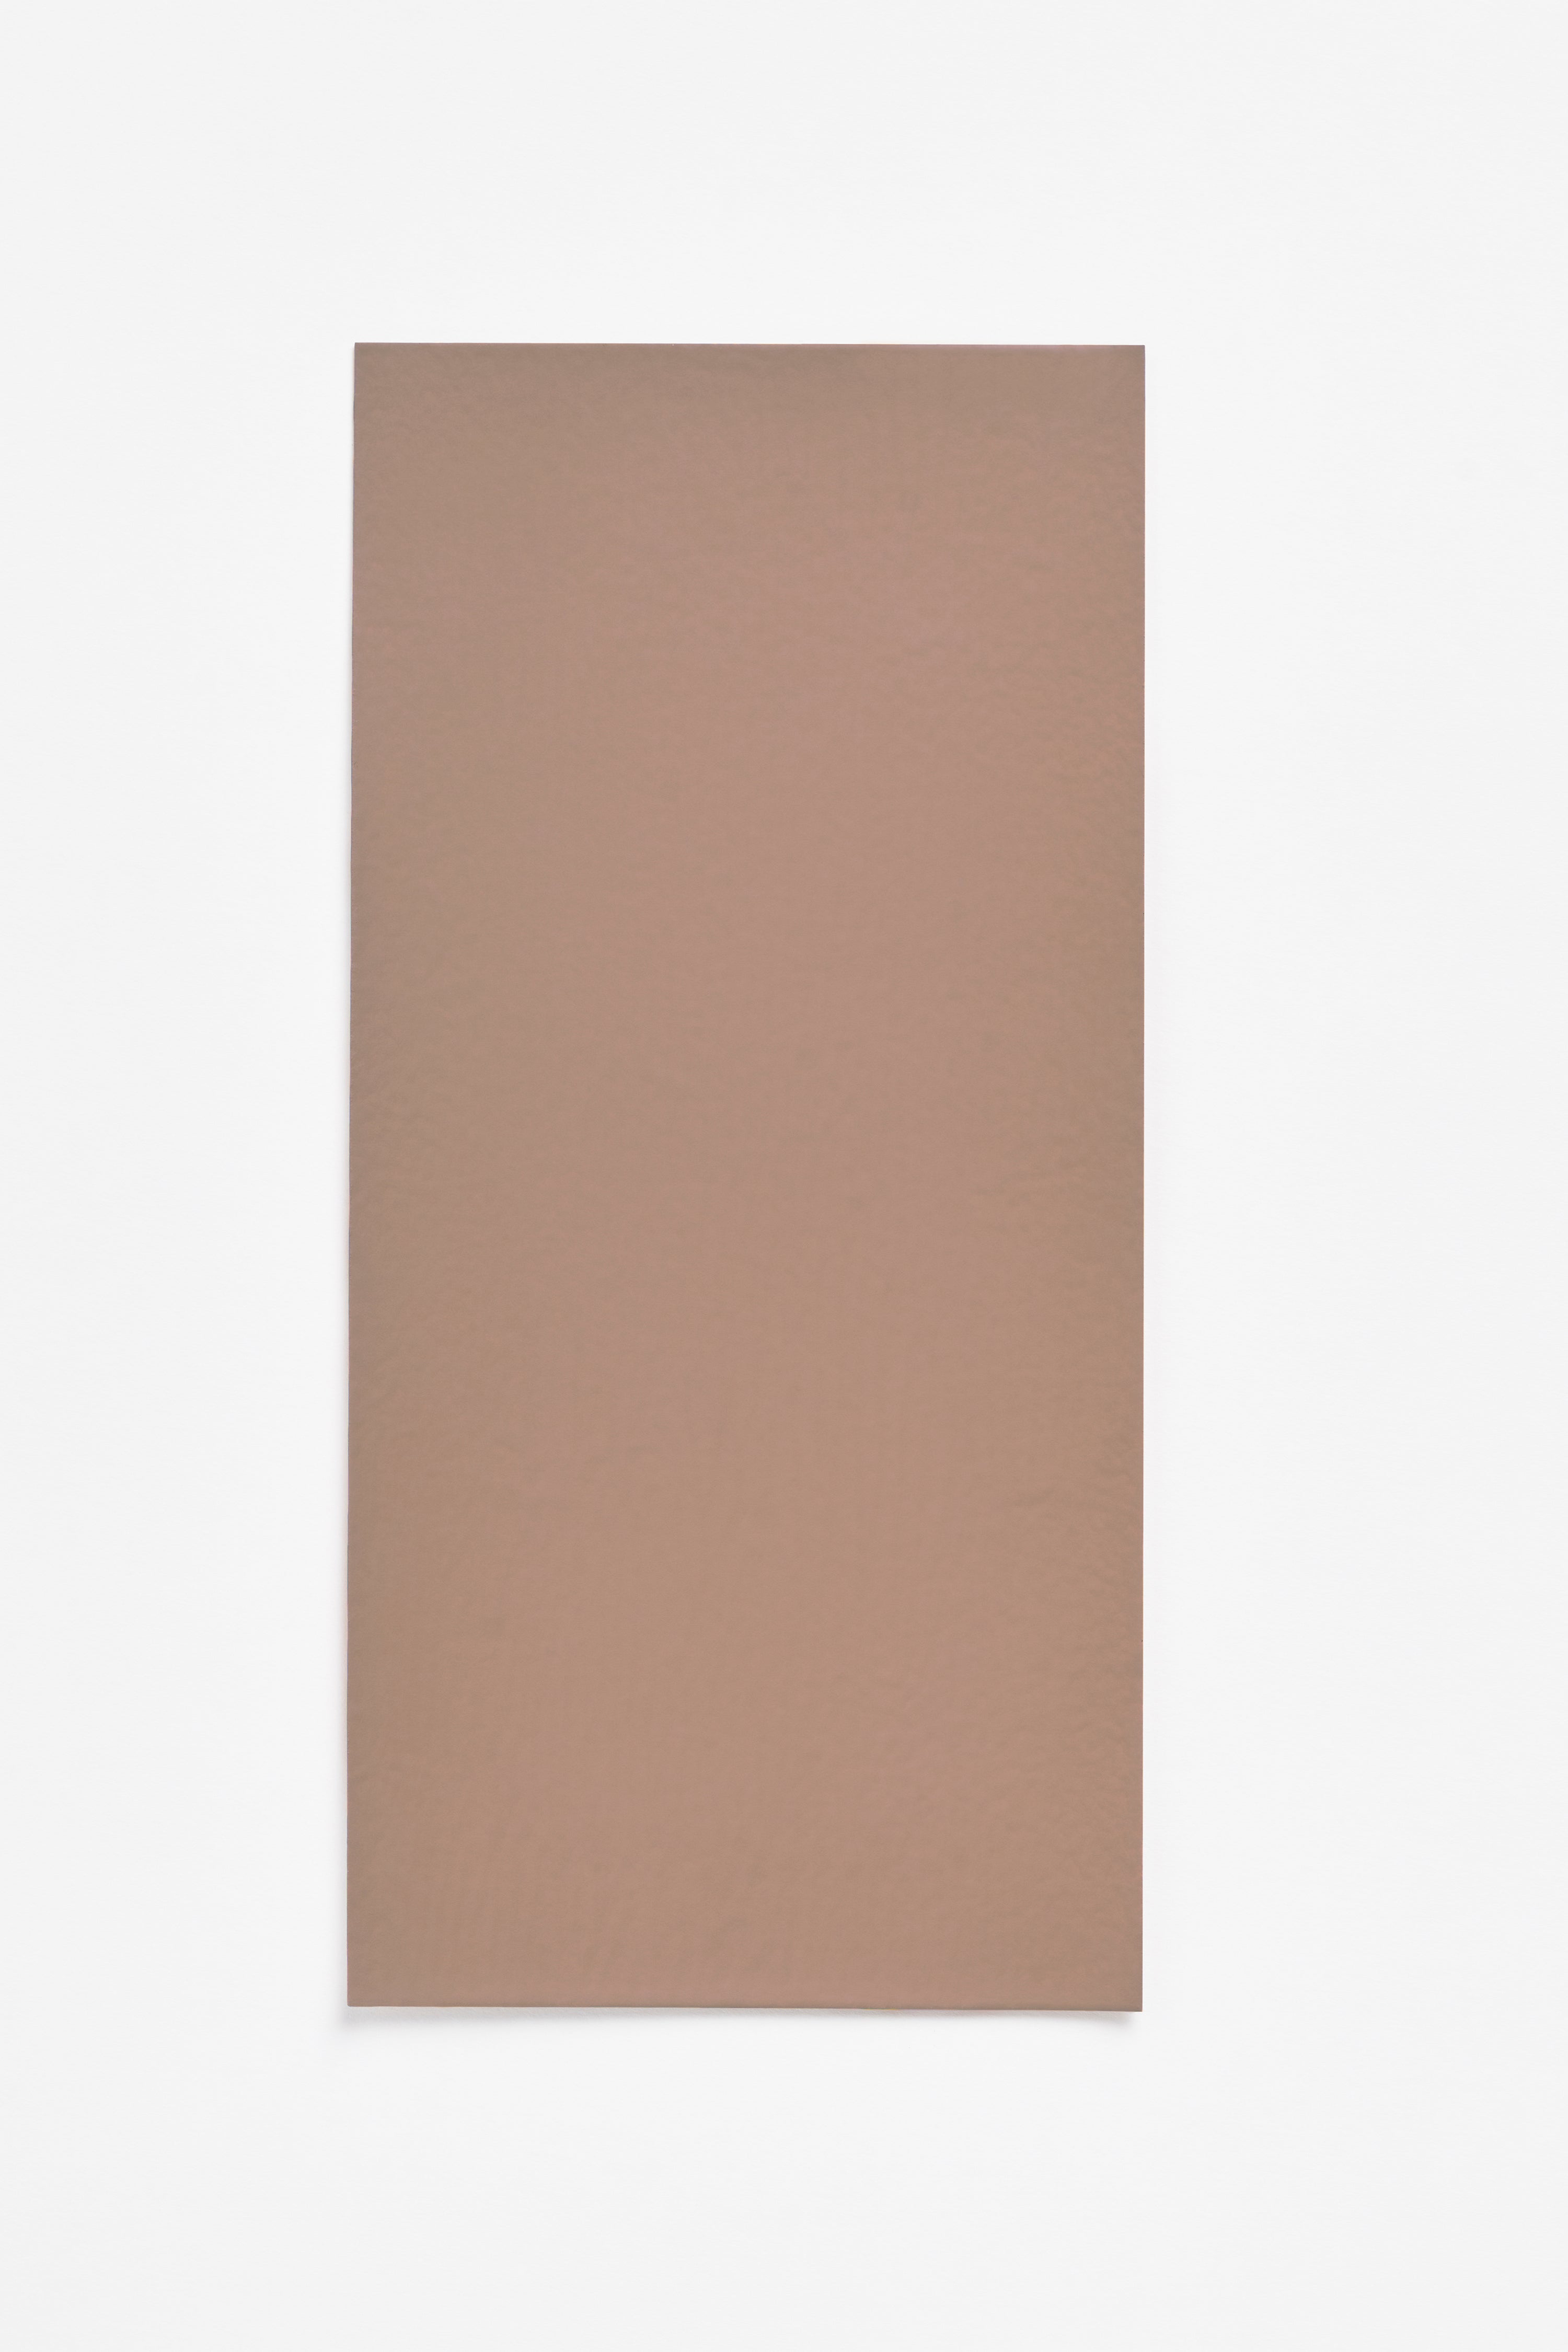 AN TR 06 Tuscan Terracotta by Studio Andrew Trotter